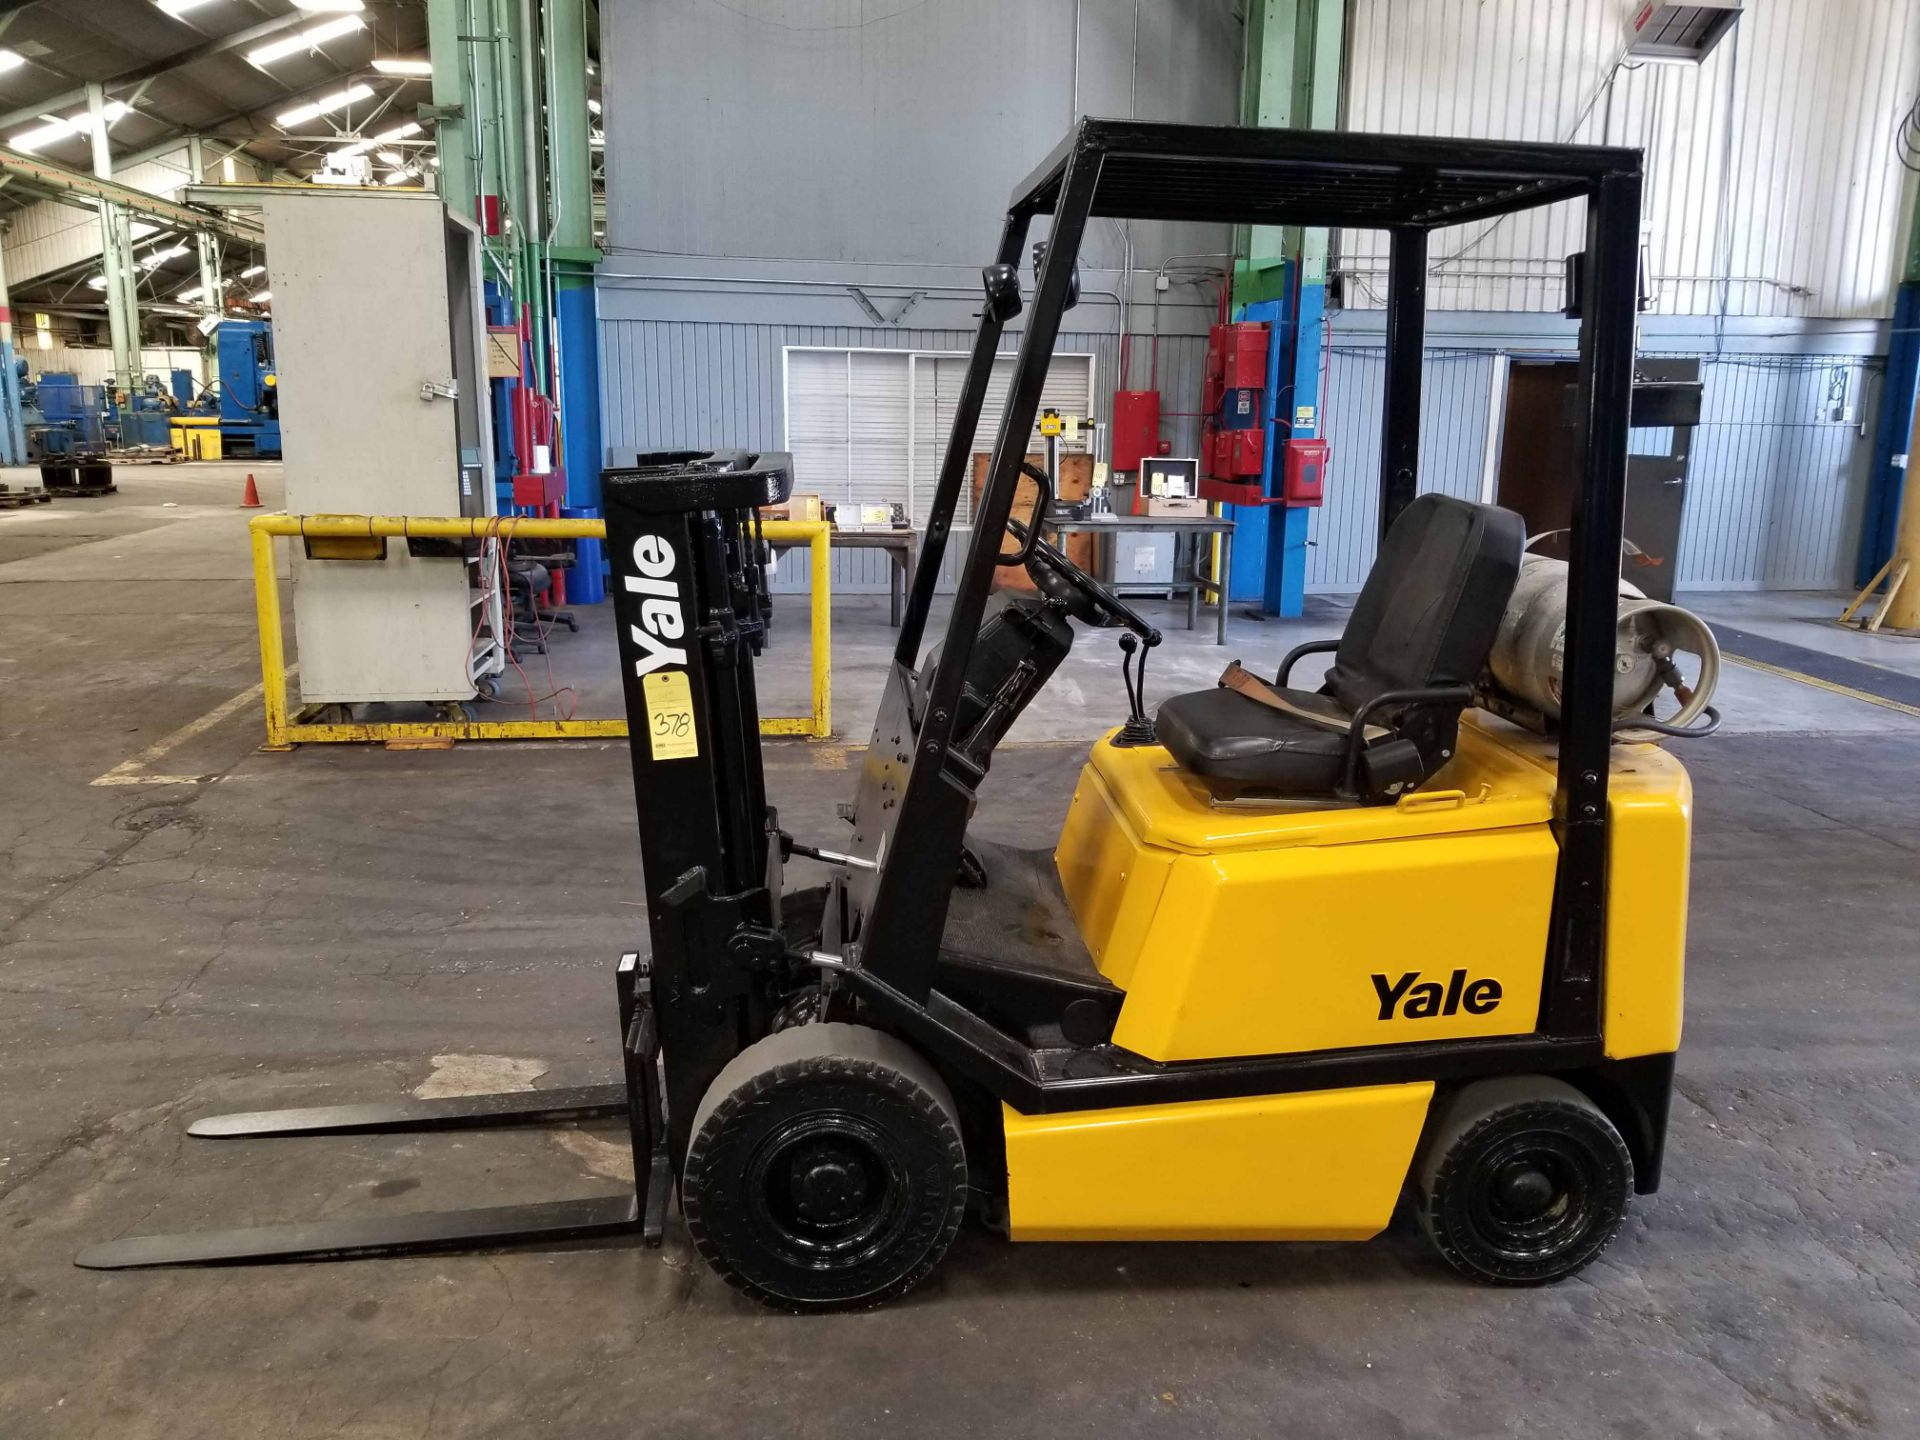 FORKLIFT, YALE 3,000 LB. CAP. MDL. GLP030, new 2004, LPG, 2-stage mast, 84” lift height, pneu. style